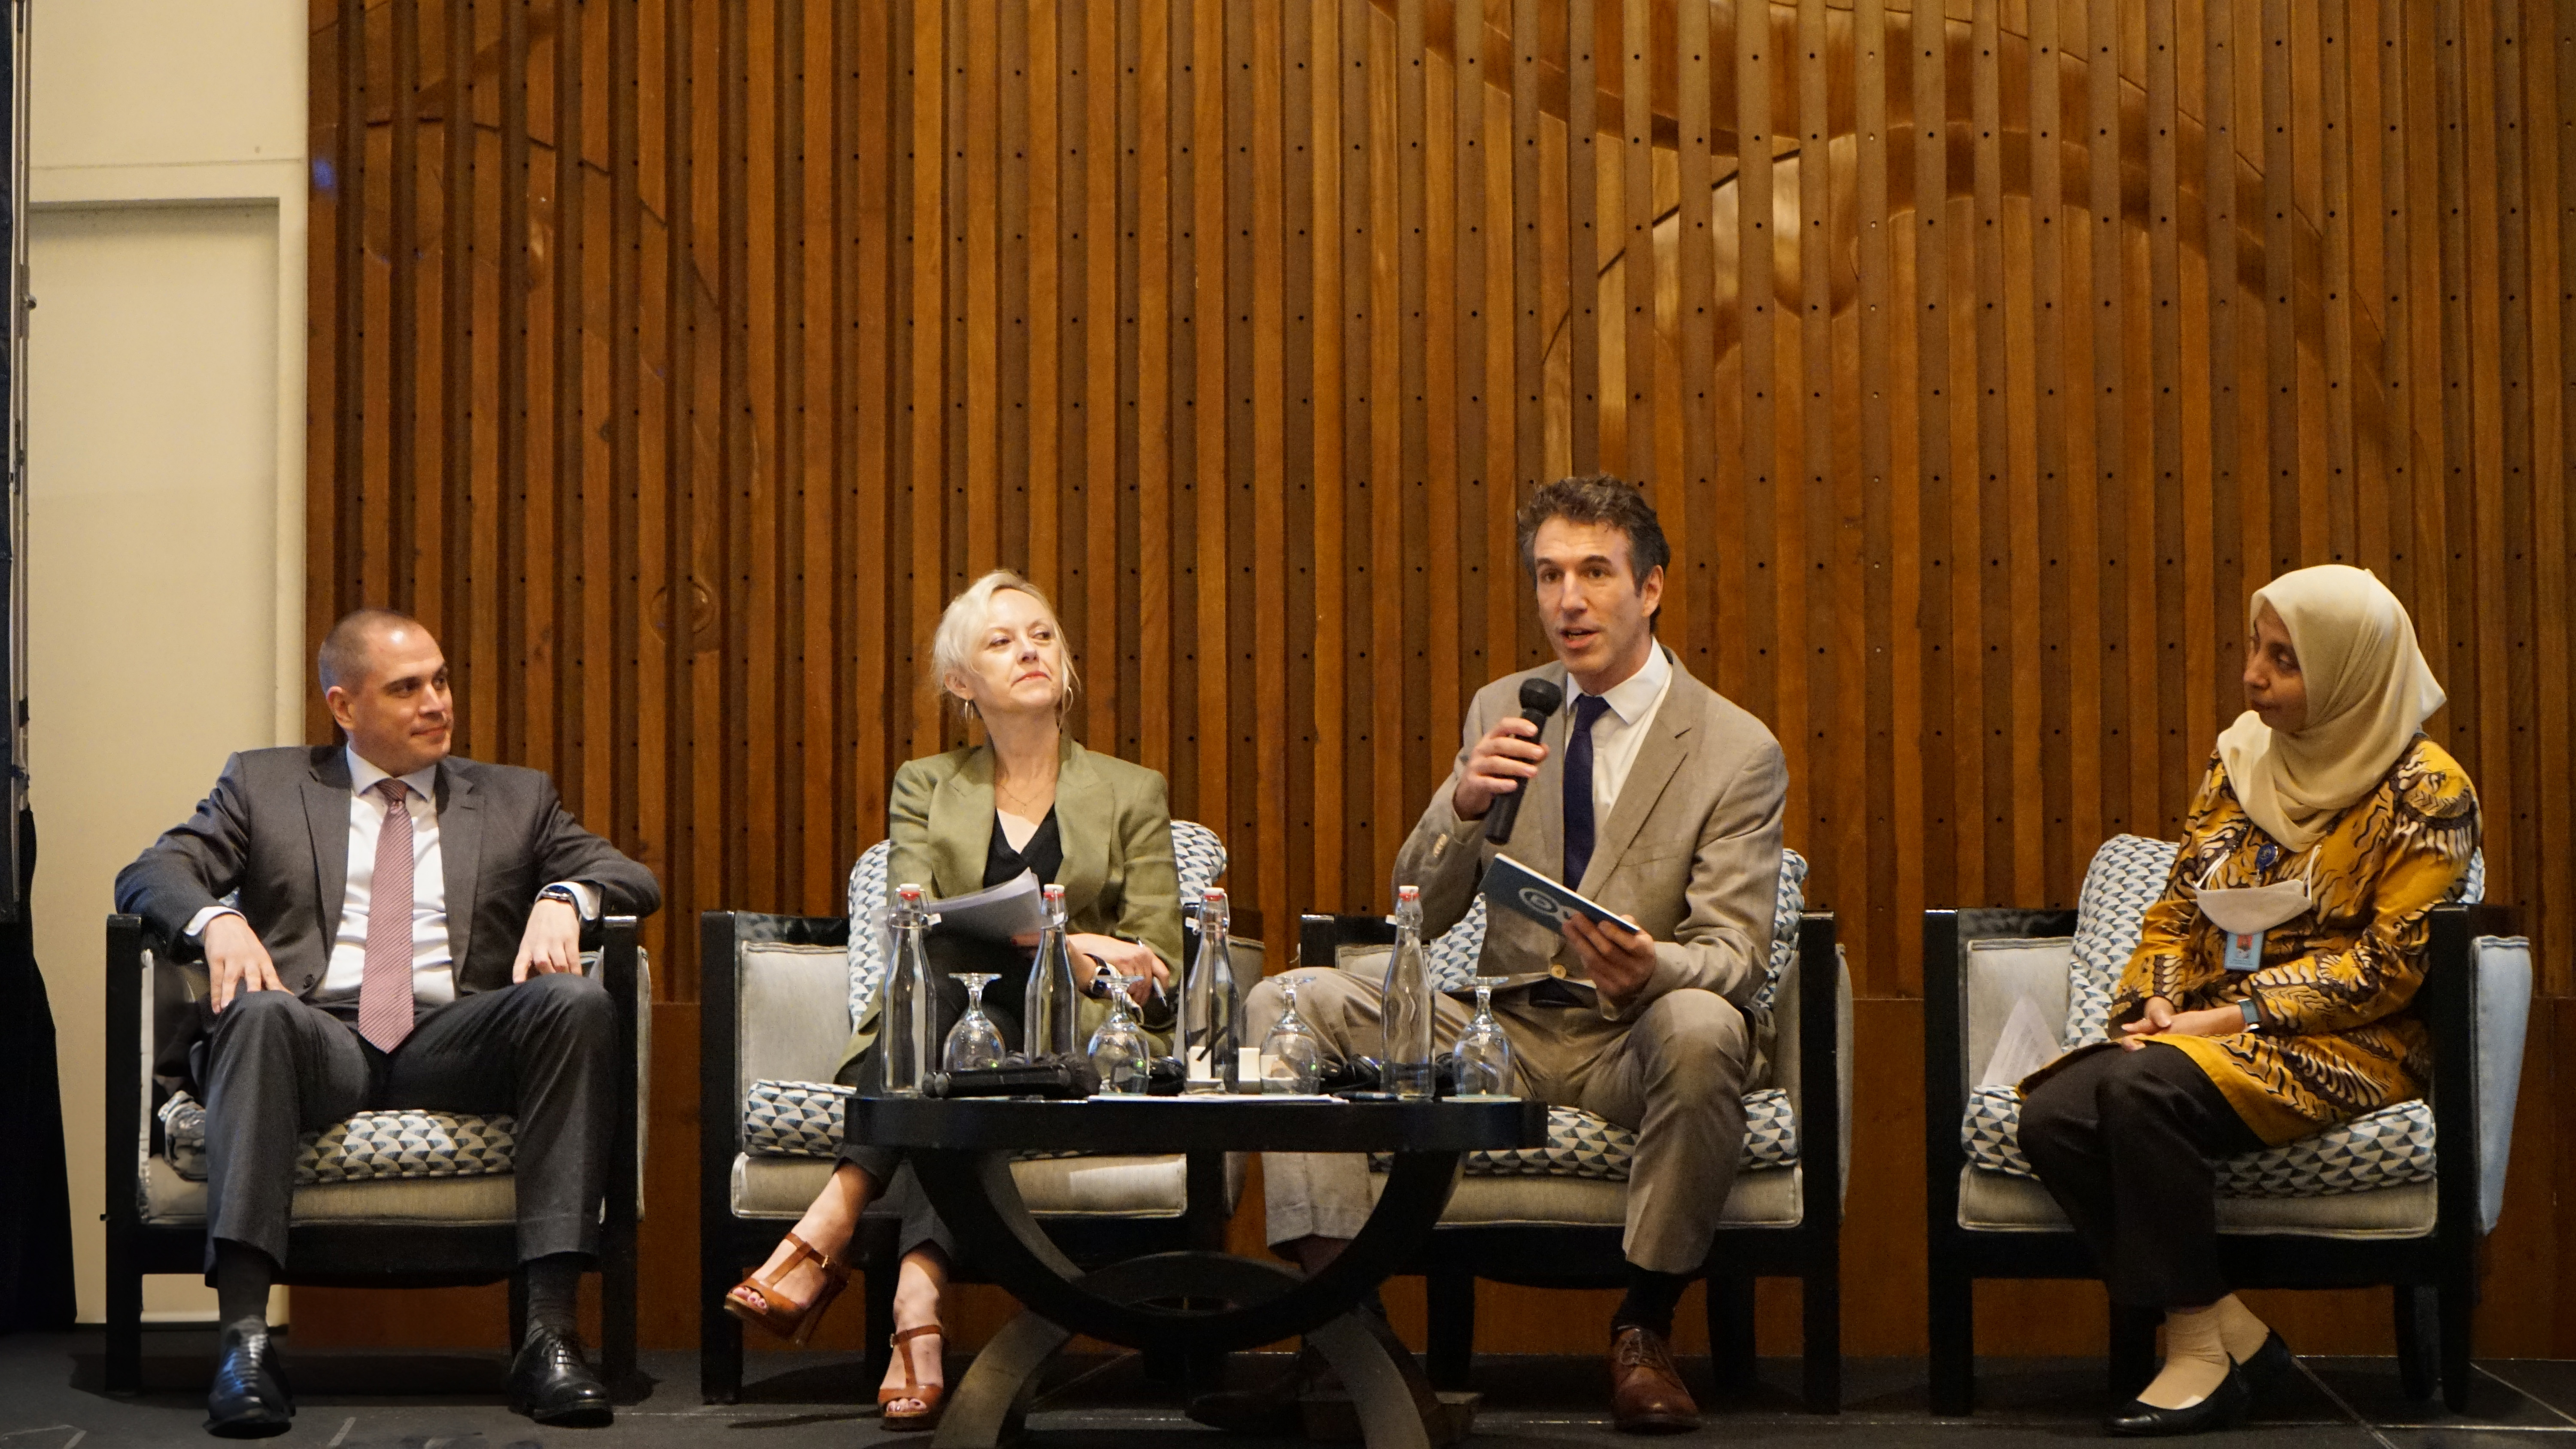 The United Nations Development Programme (UNDP) and the German Embassy in Jakarta, in collaboration with the German Agency for International Cooperation (GIZ), hosted a high-level event on Business and Human Rights. 